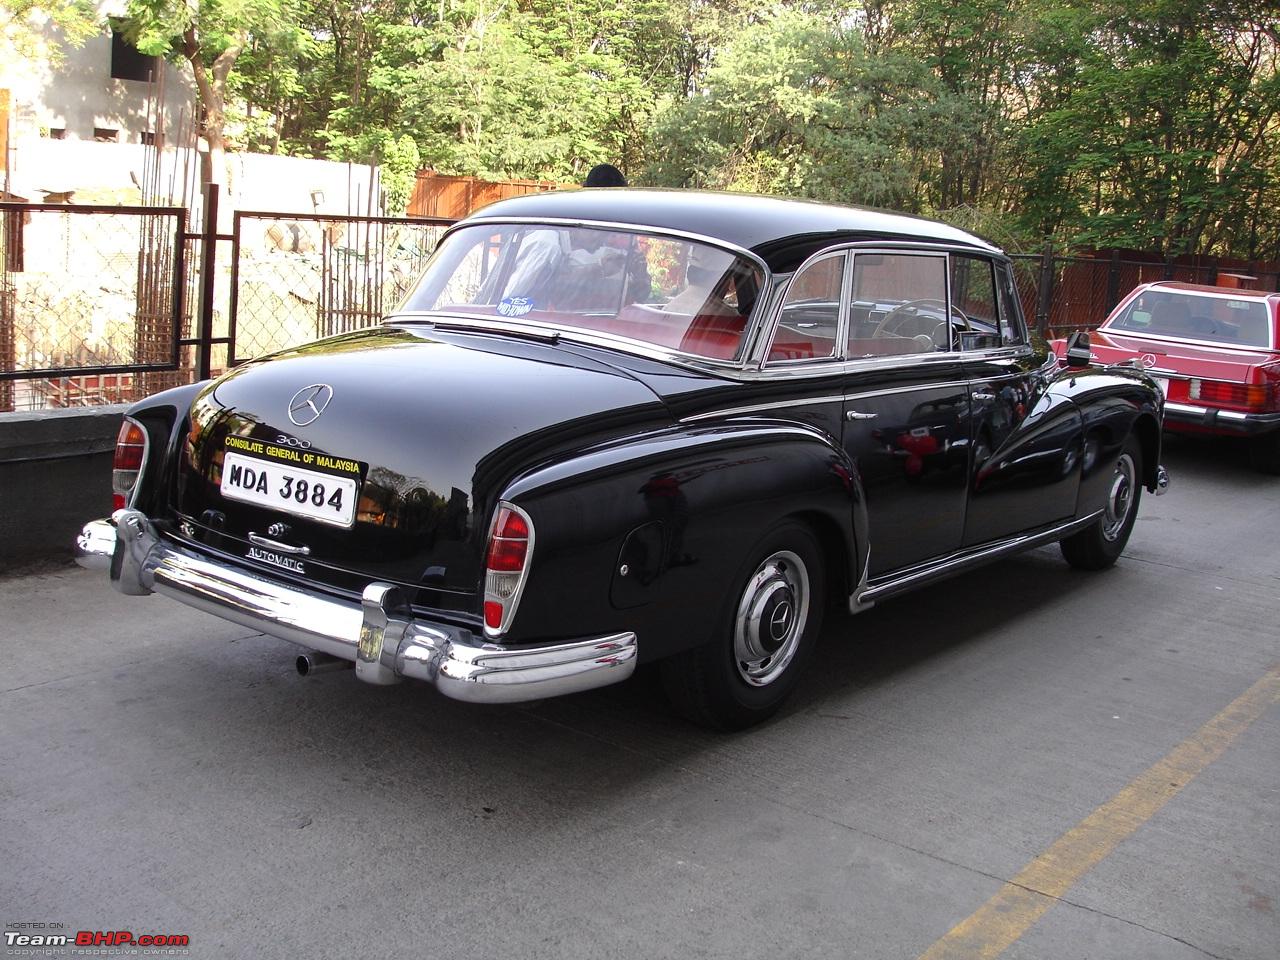 Old mercedes car in india #3